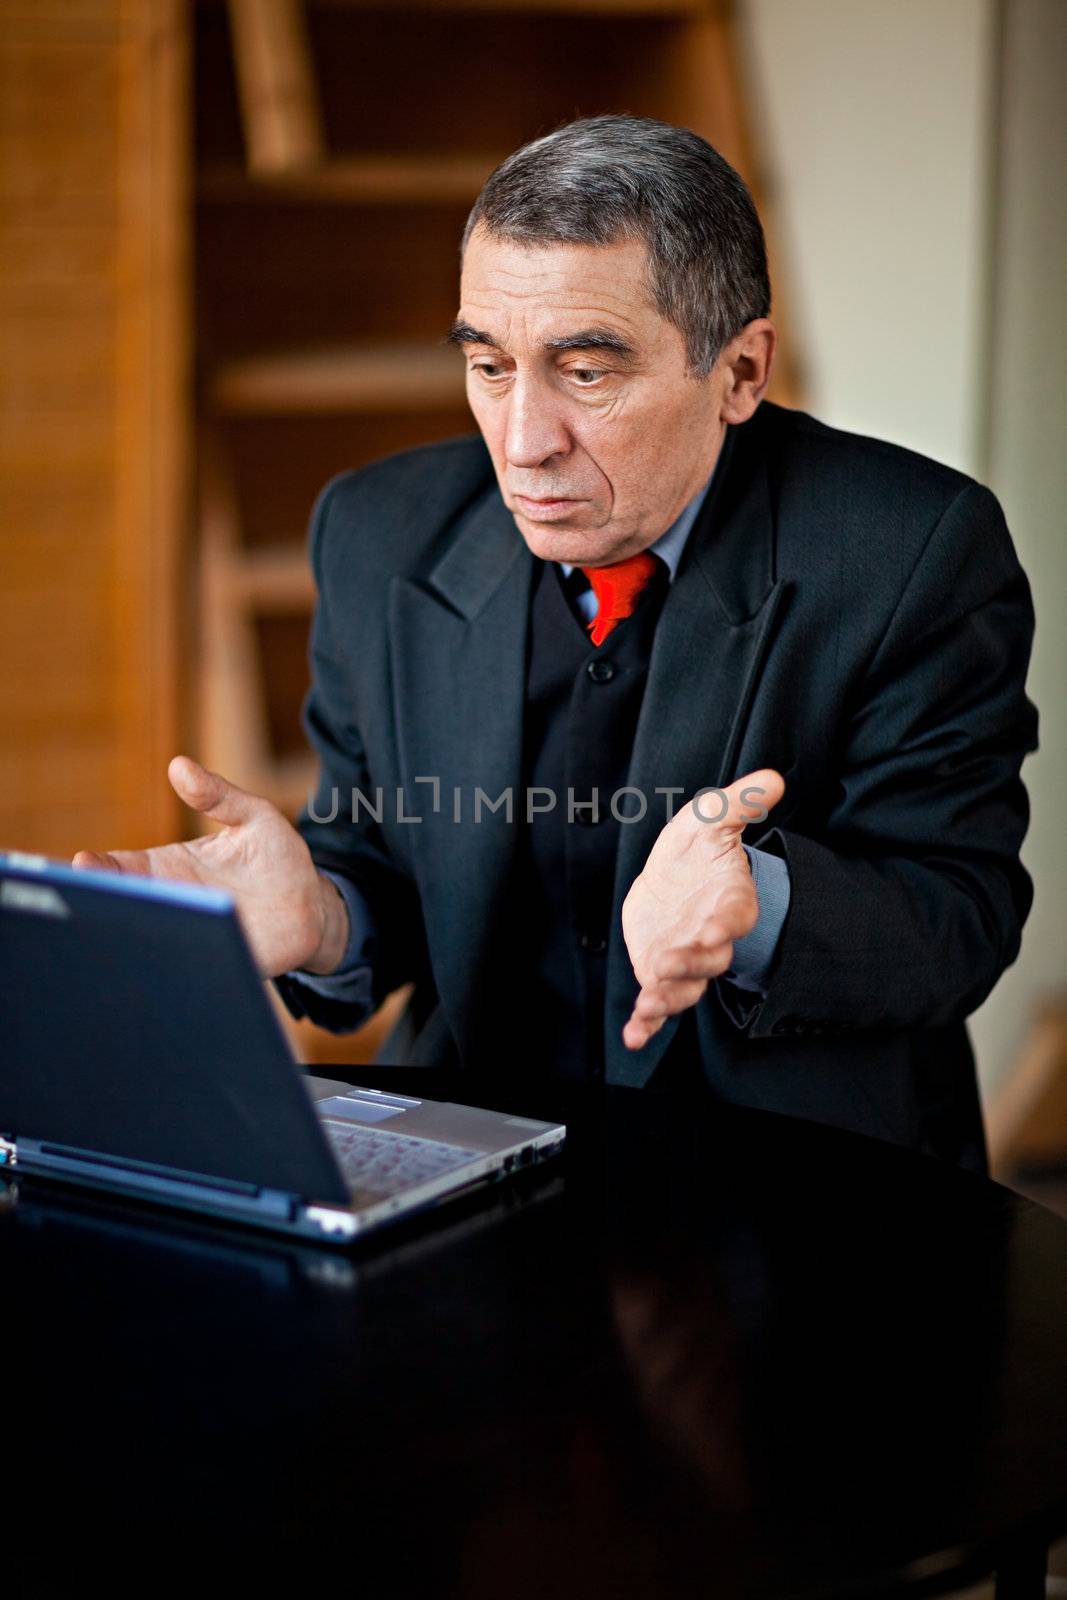 Frustrated Businessman by Gravicapa